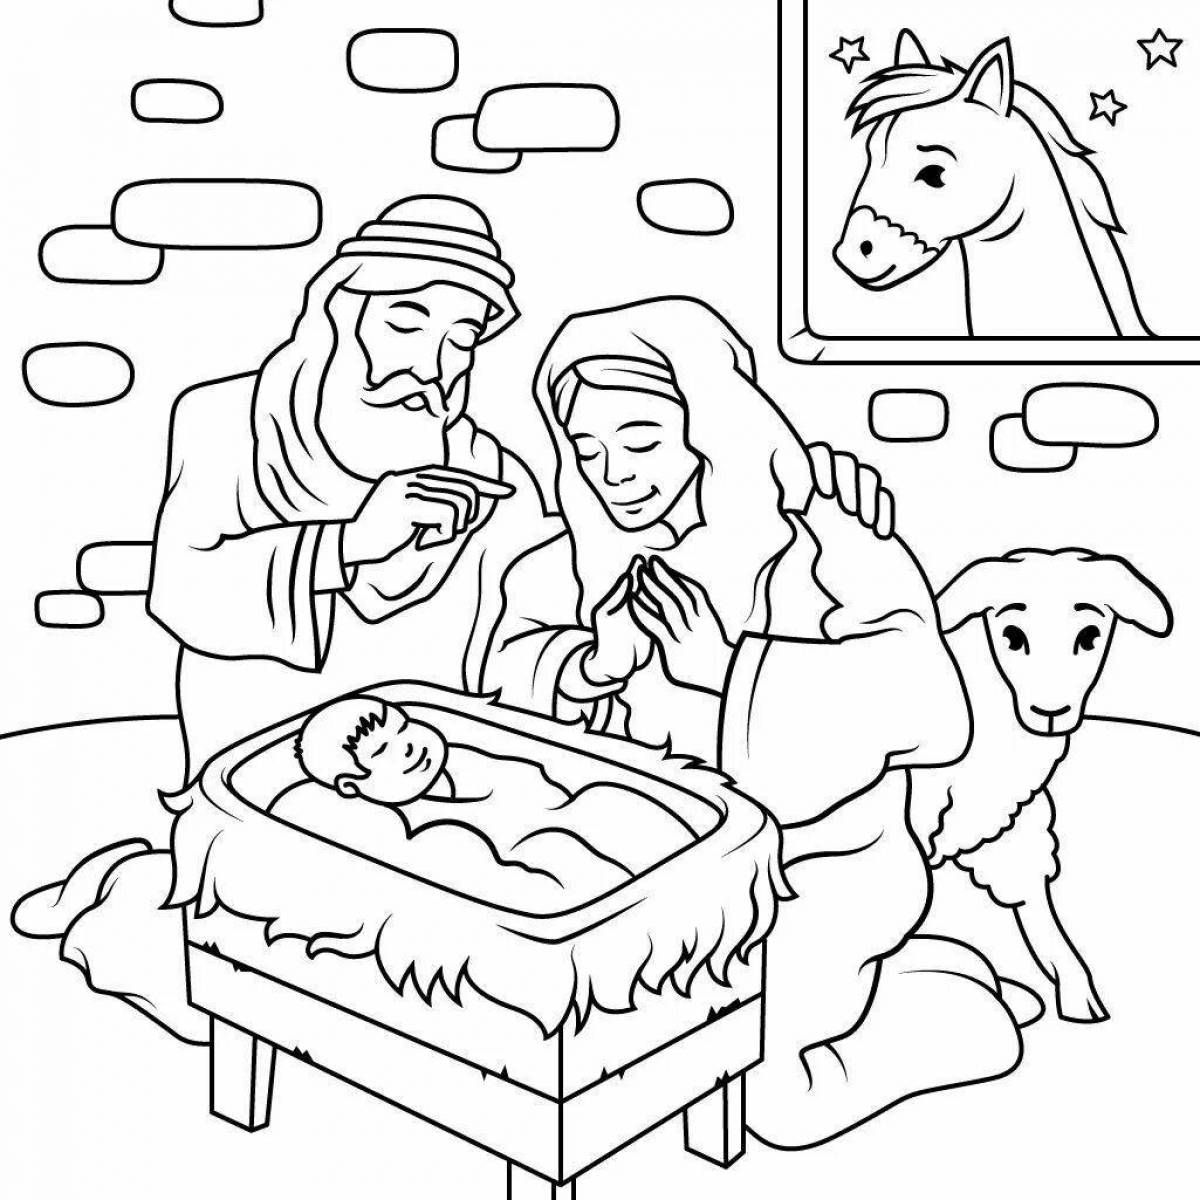 Coloring page exalted joseph and mary